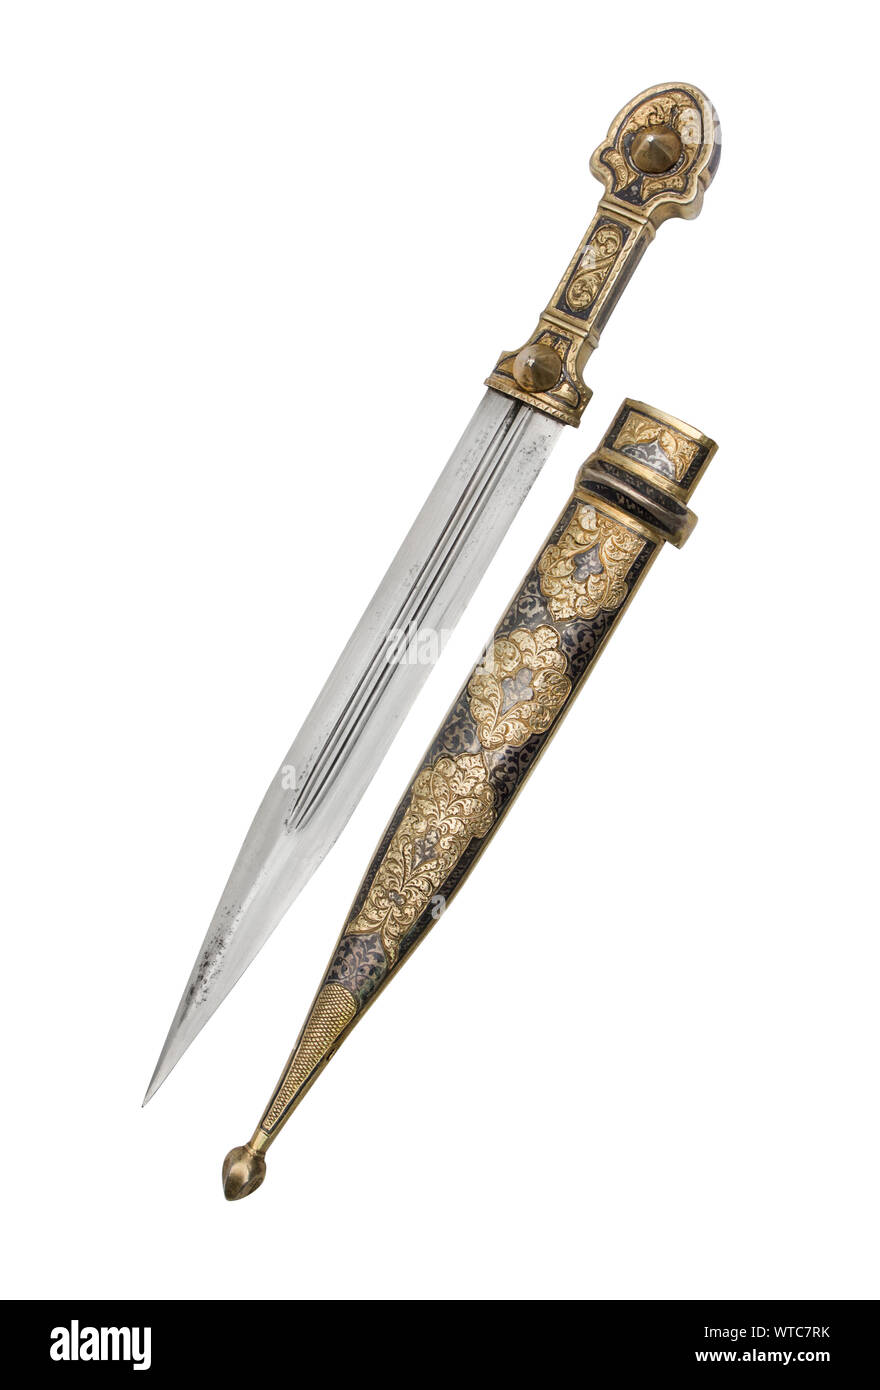 Russian or soviet Kubachi silver mounted dagger of the 20th century. Caucasian dagger in gilded silver mounts decorated with engraving and niello. Stock Photo